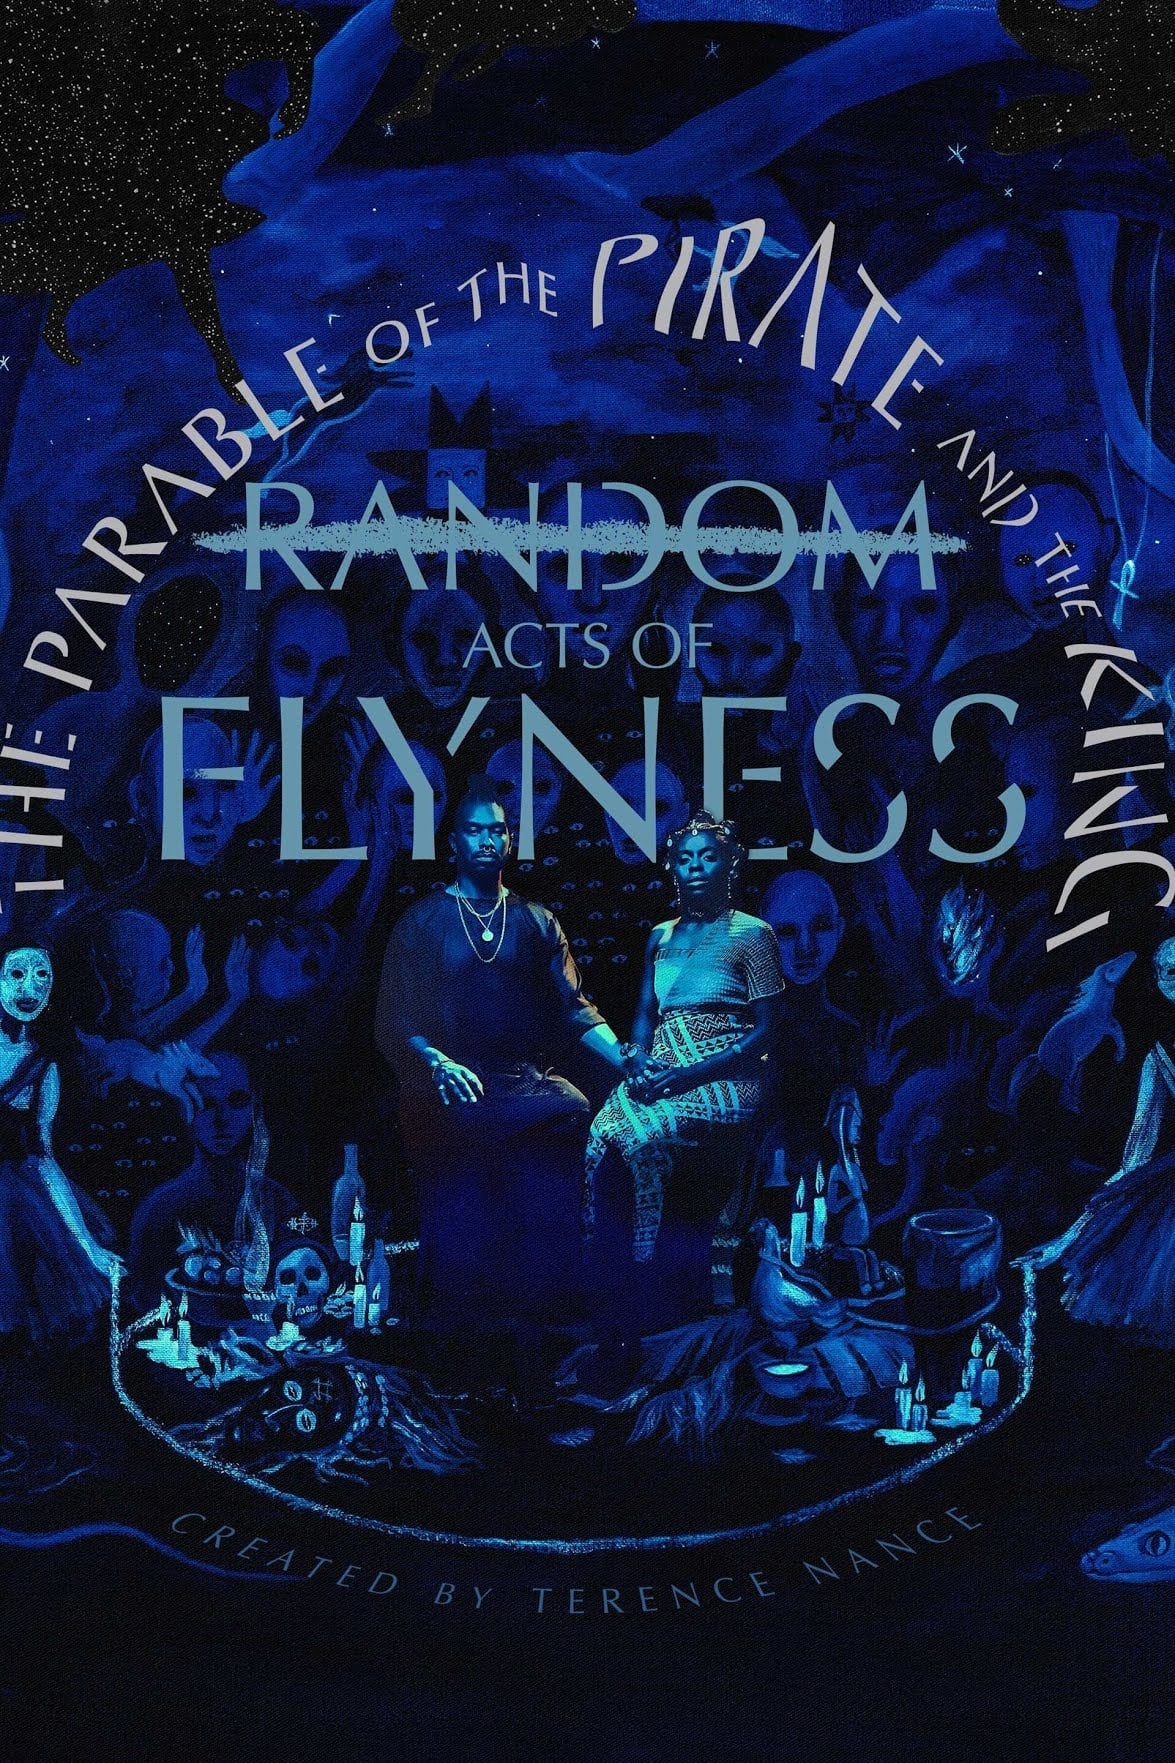 Random Acts of Flyness (2018)